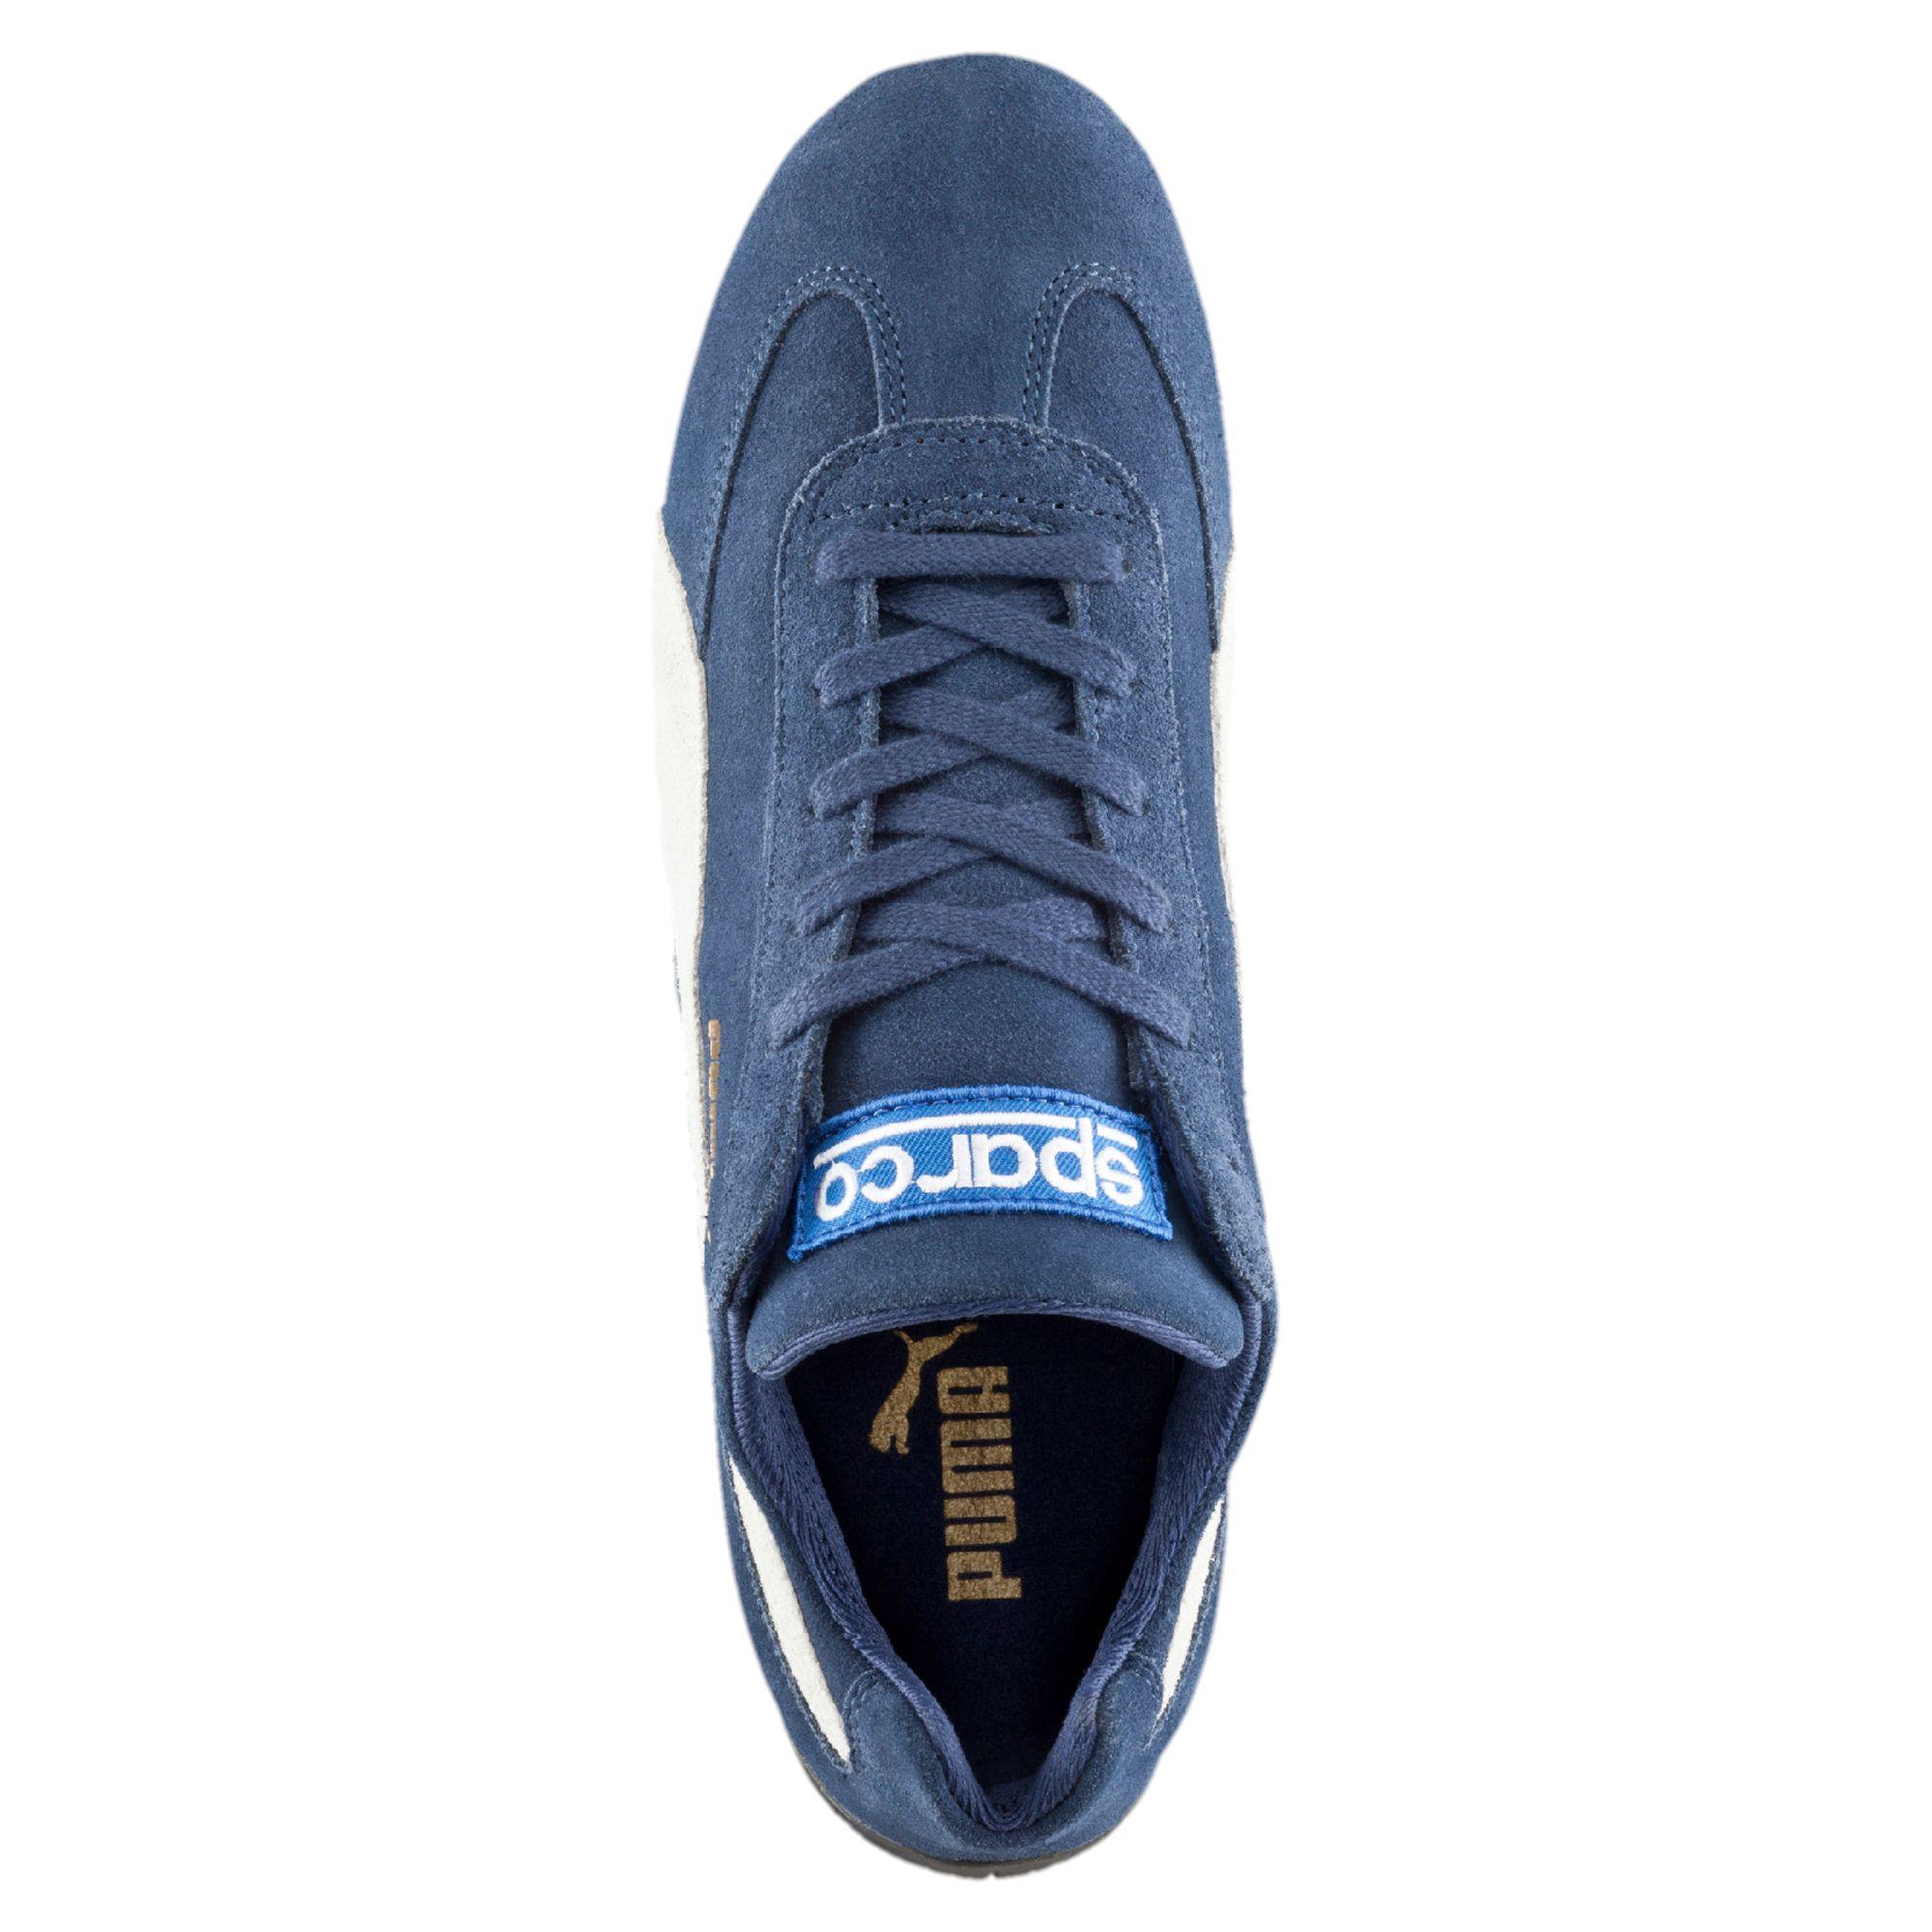 PUMA Suede Speed Cat Sparco Shoes in 